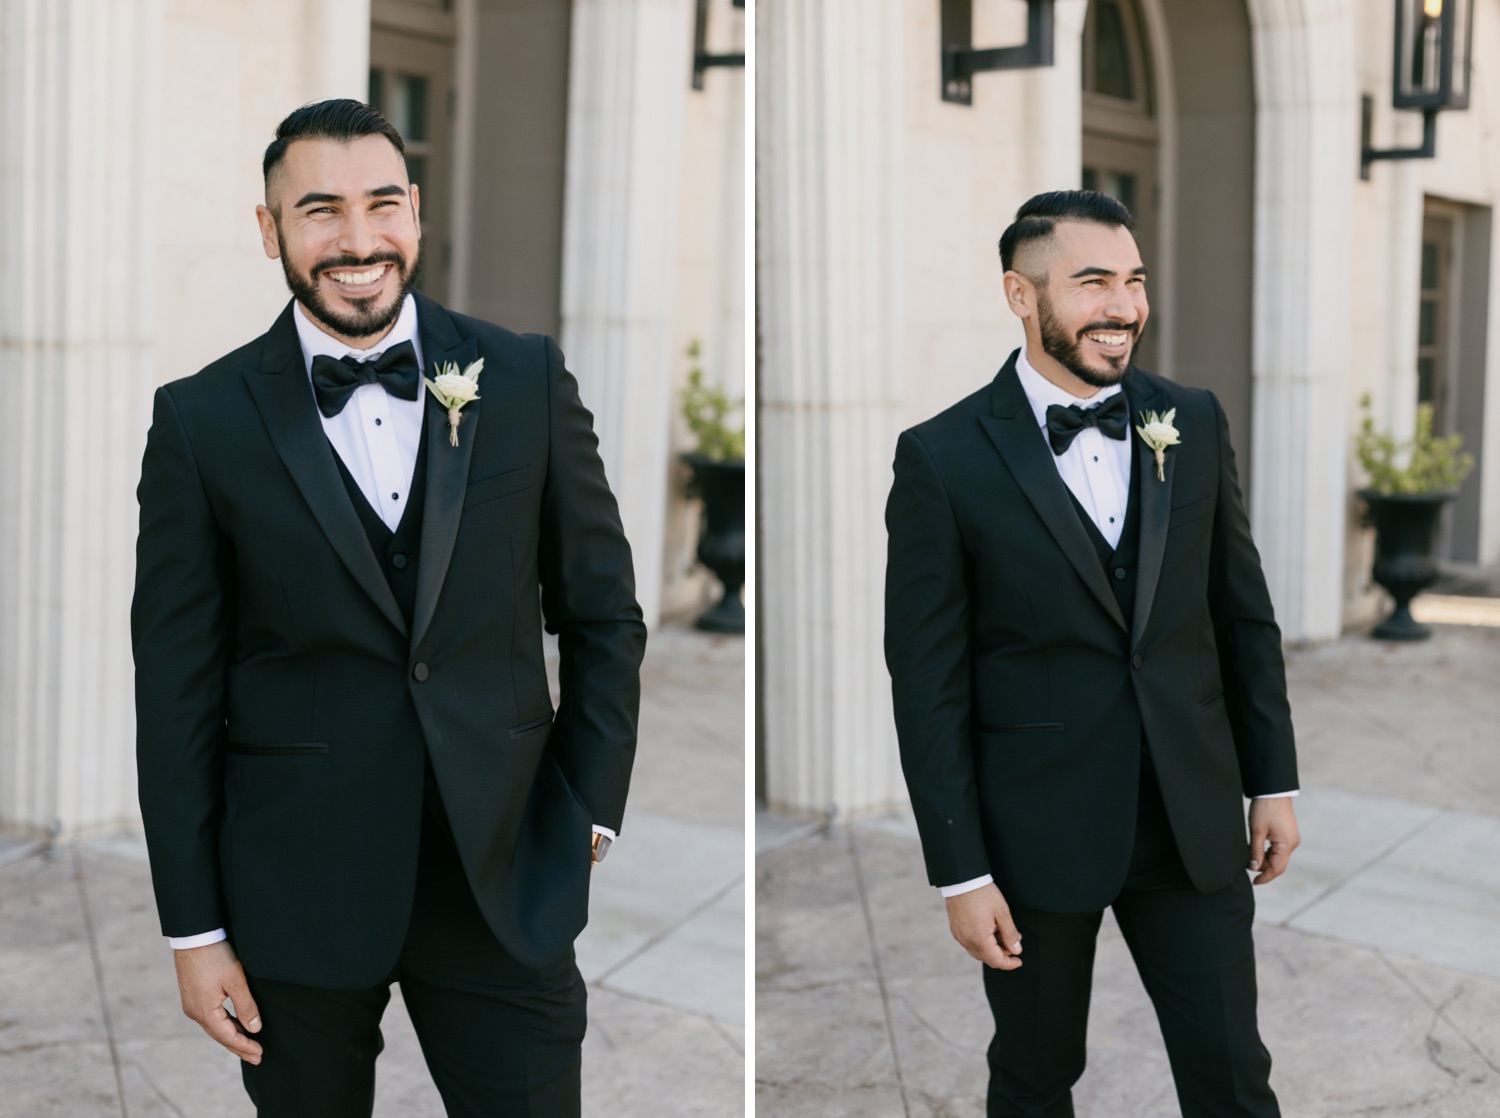 Groom posing for portraits at tooth and nail winery wedding by tayler enerle photography